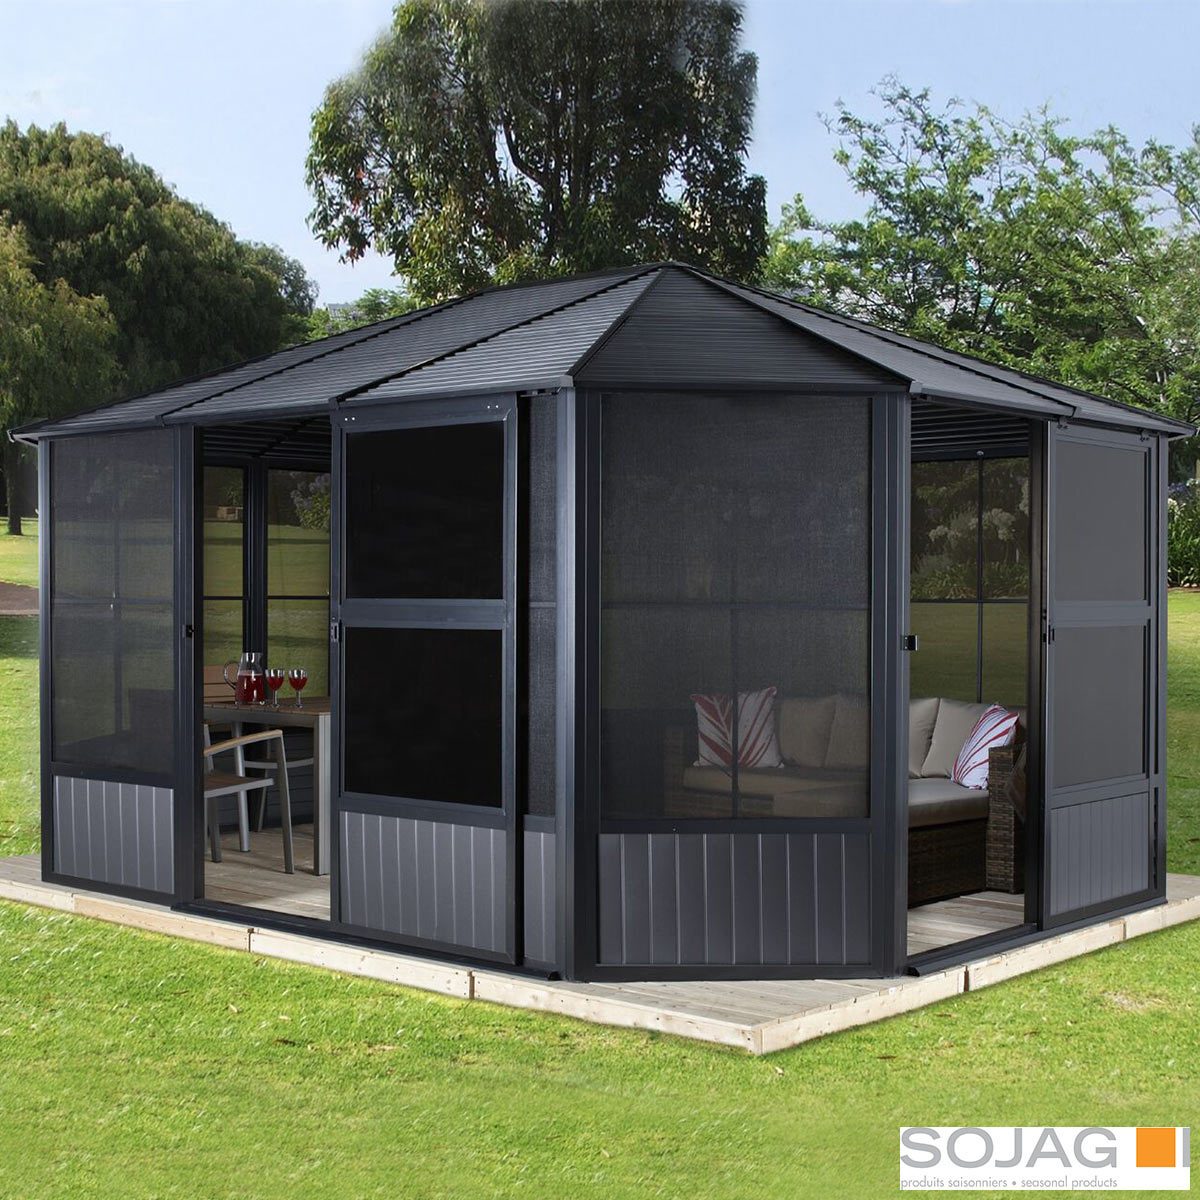 Sojag Charleston 12ft x 12ft (3.67 x 3.67m) Aluminium Frame Solarium With Galvanised Steel Roof + Two Sliding Doors with PVC Windows + Insect Netting - Signature Retail Stores